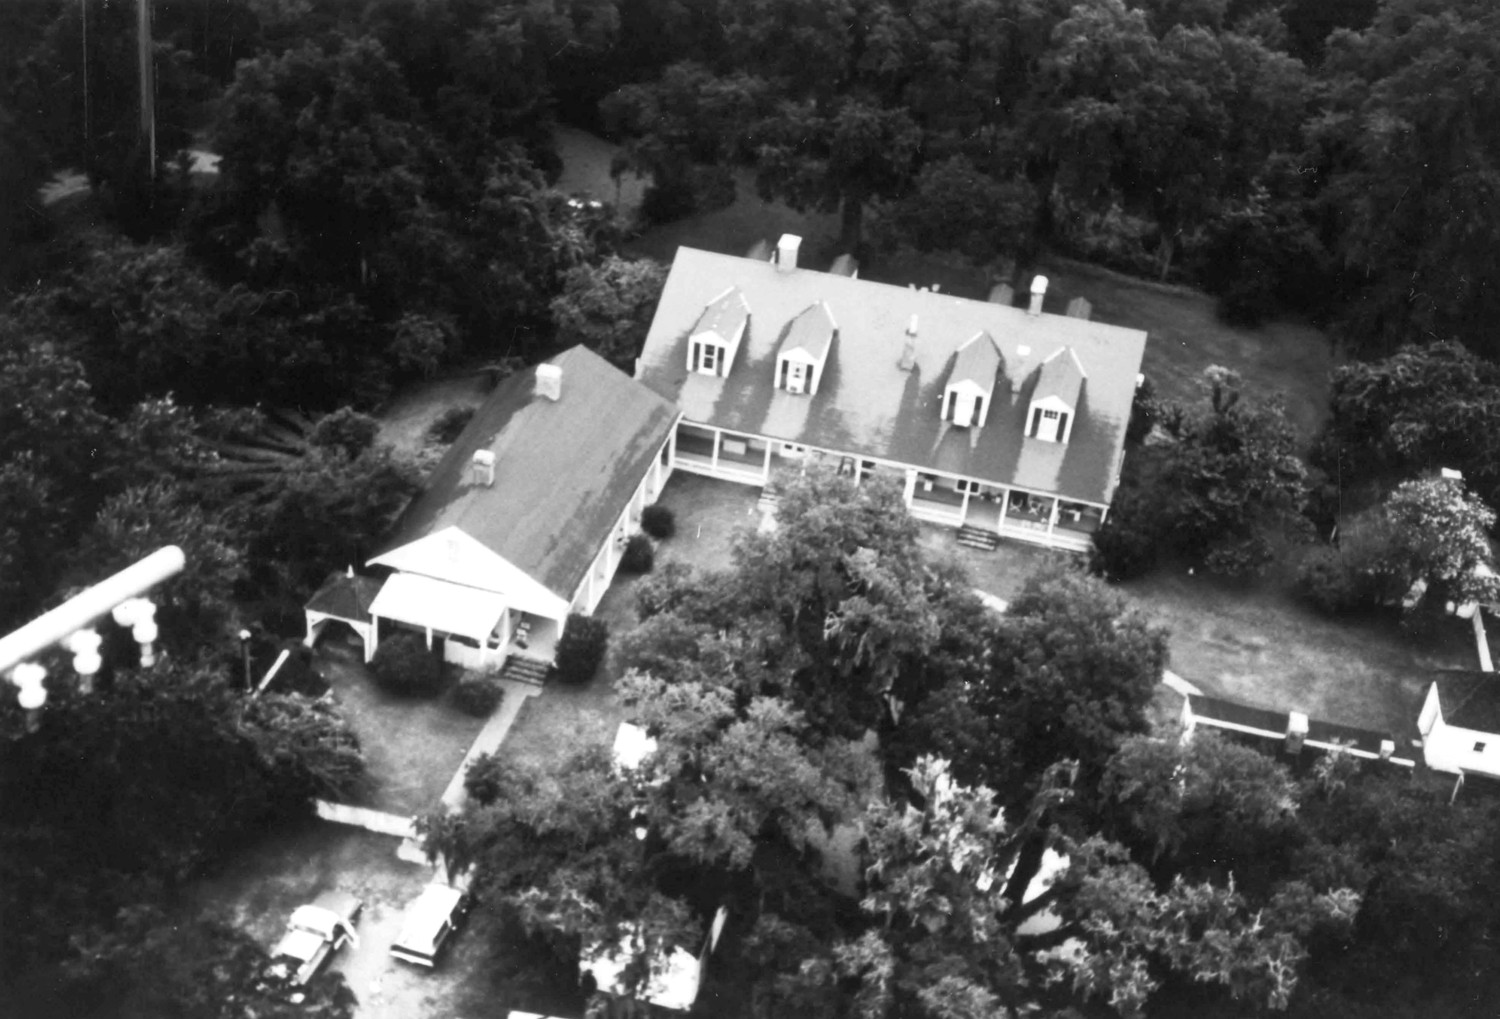 Cottage Plantation, St. Francisville Louisiana Aerial view of house and wing (1973)